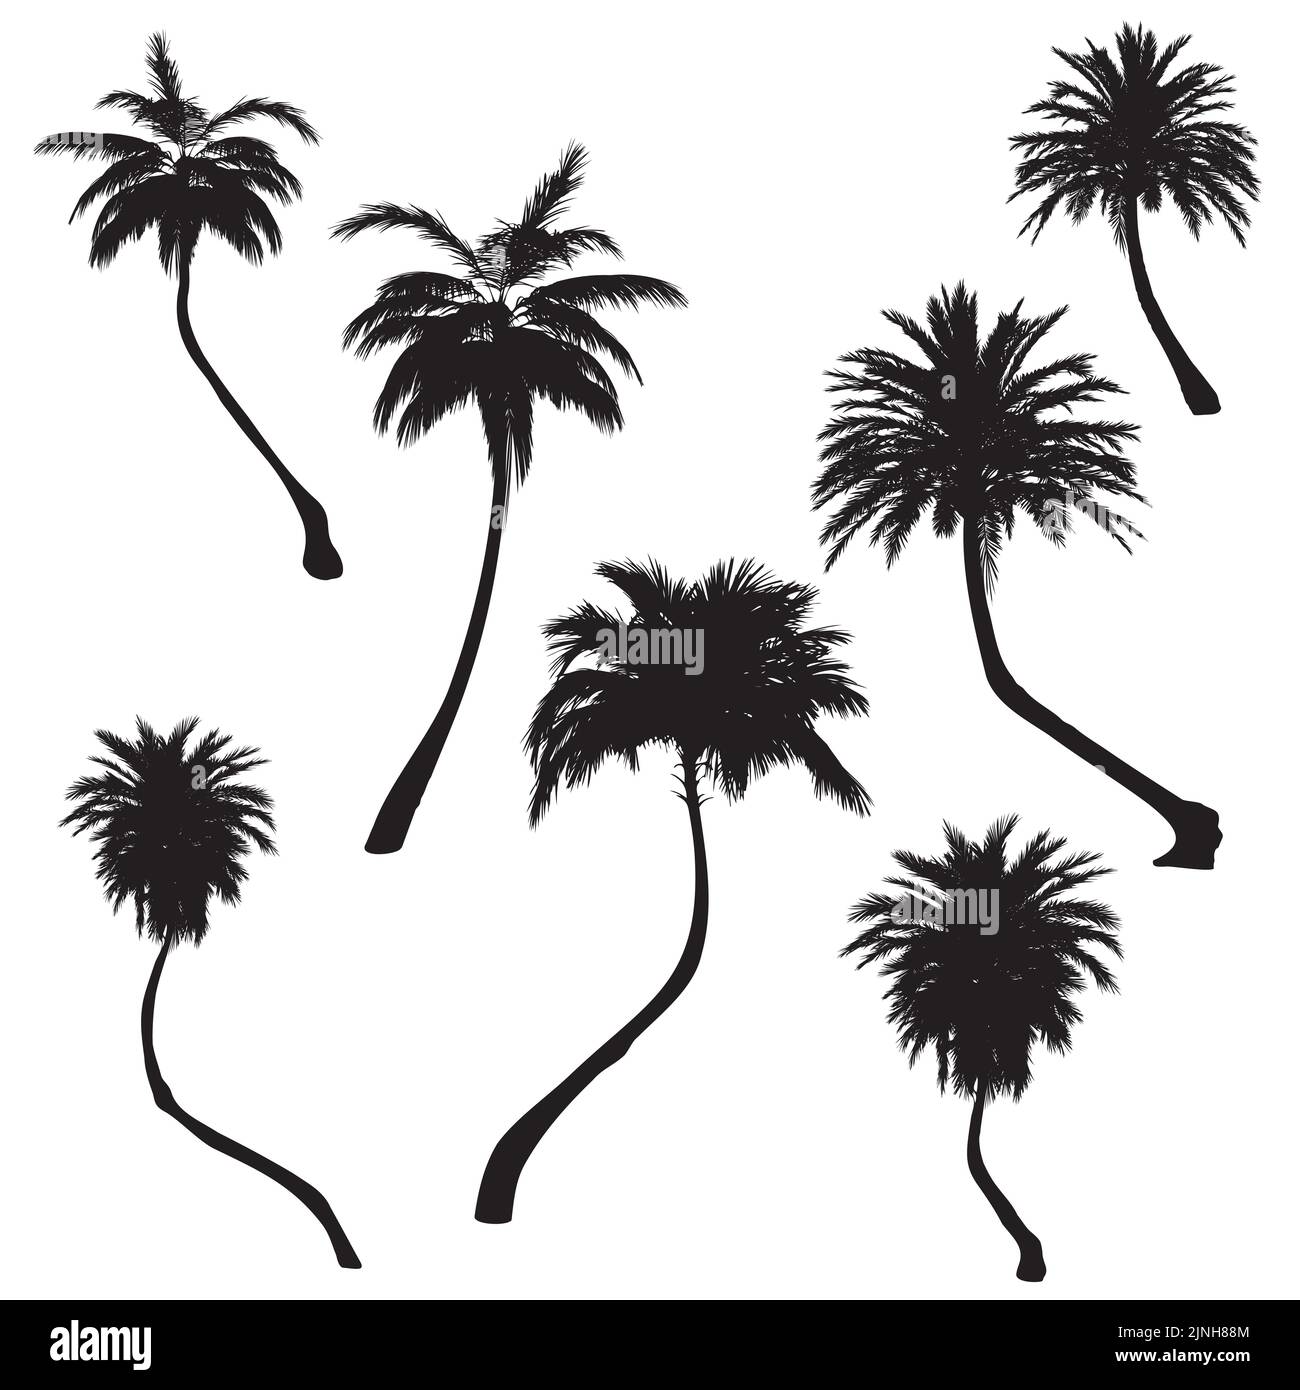 Detailed tall palm trees black silhouettes illustration Stock Vector ...